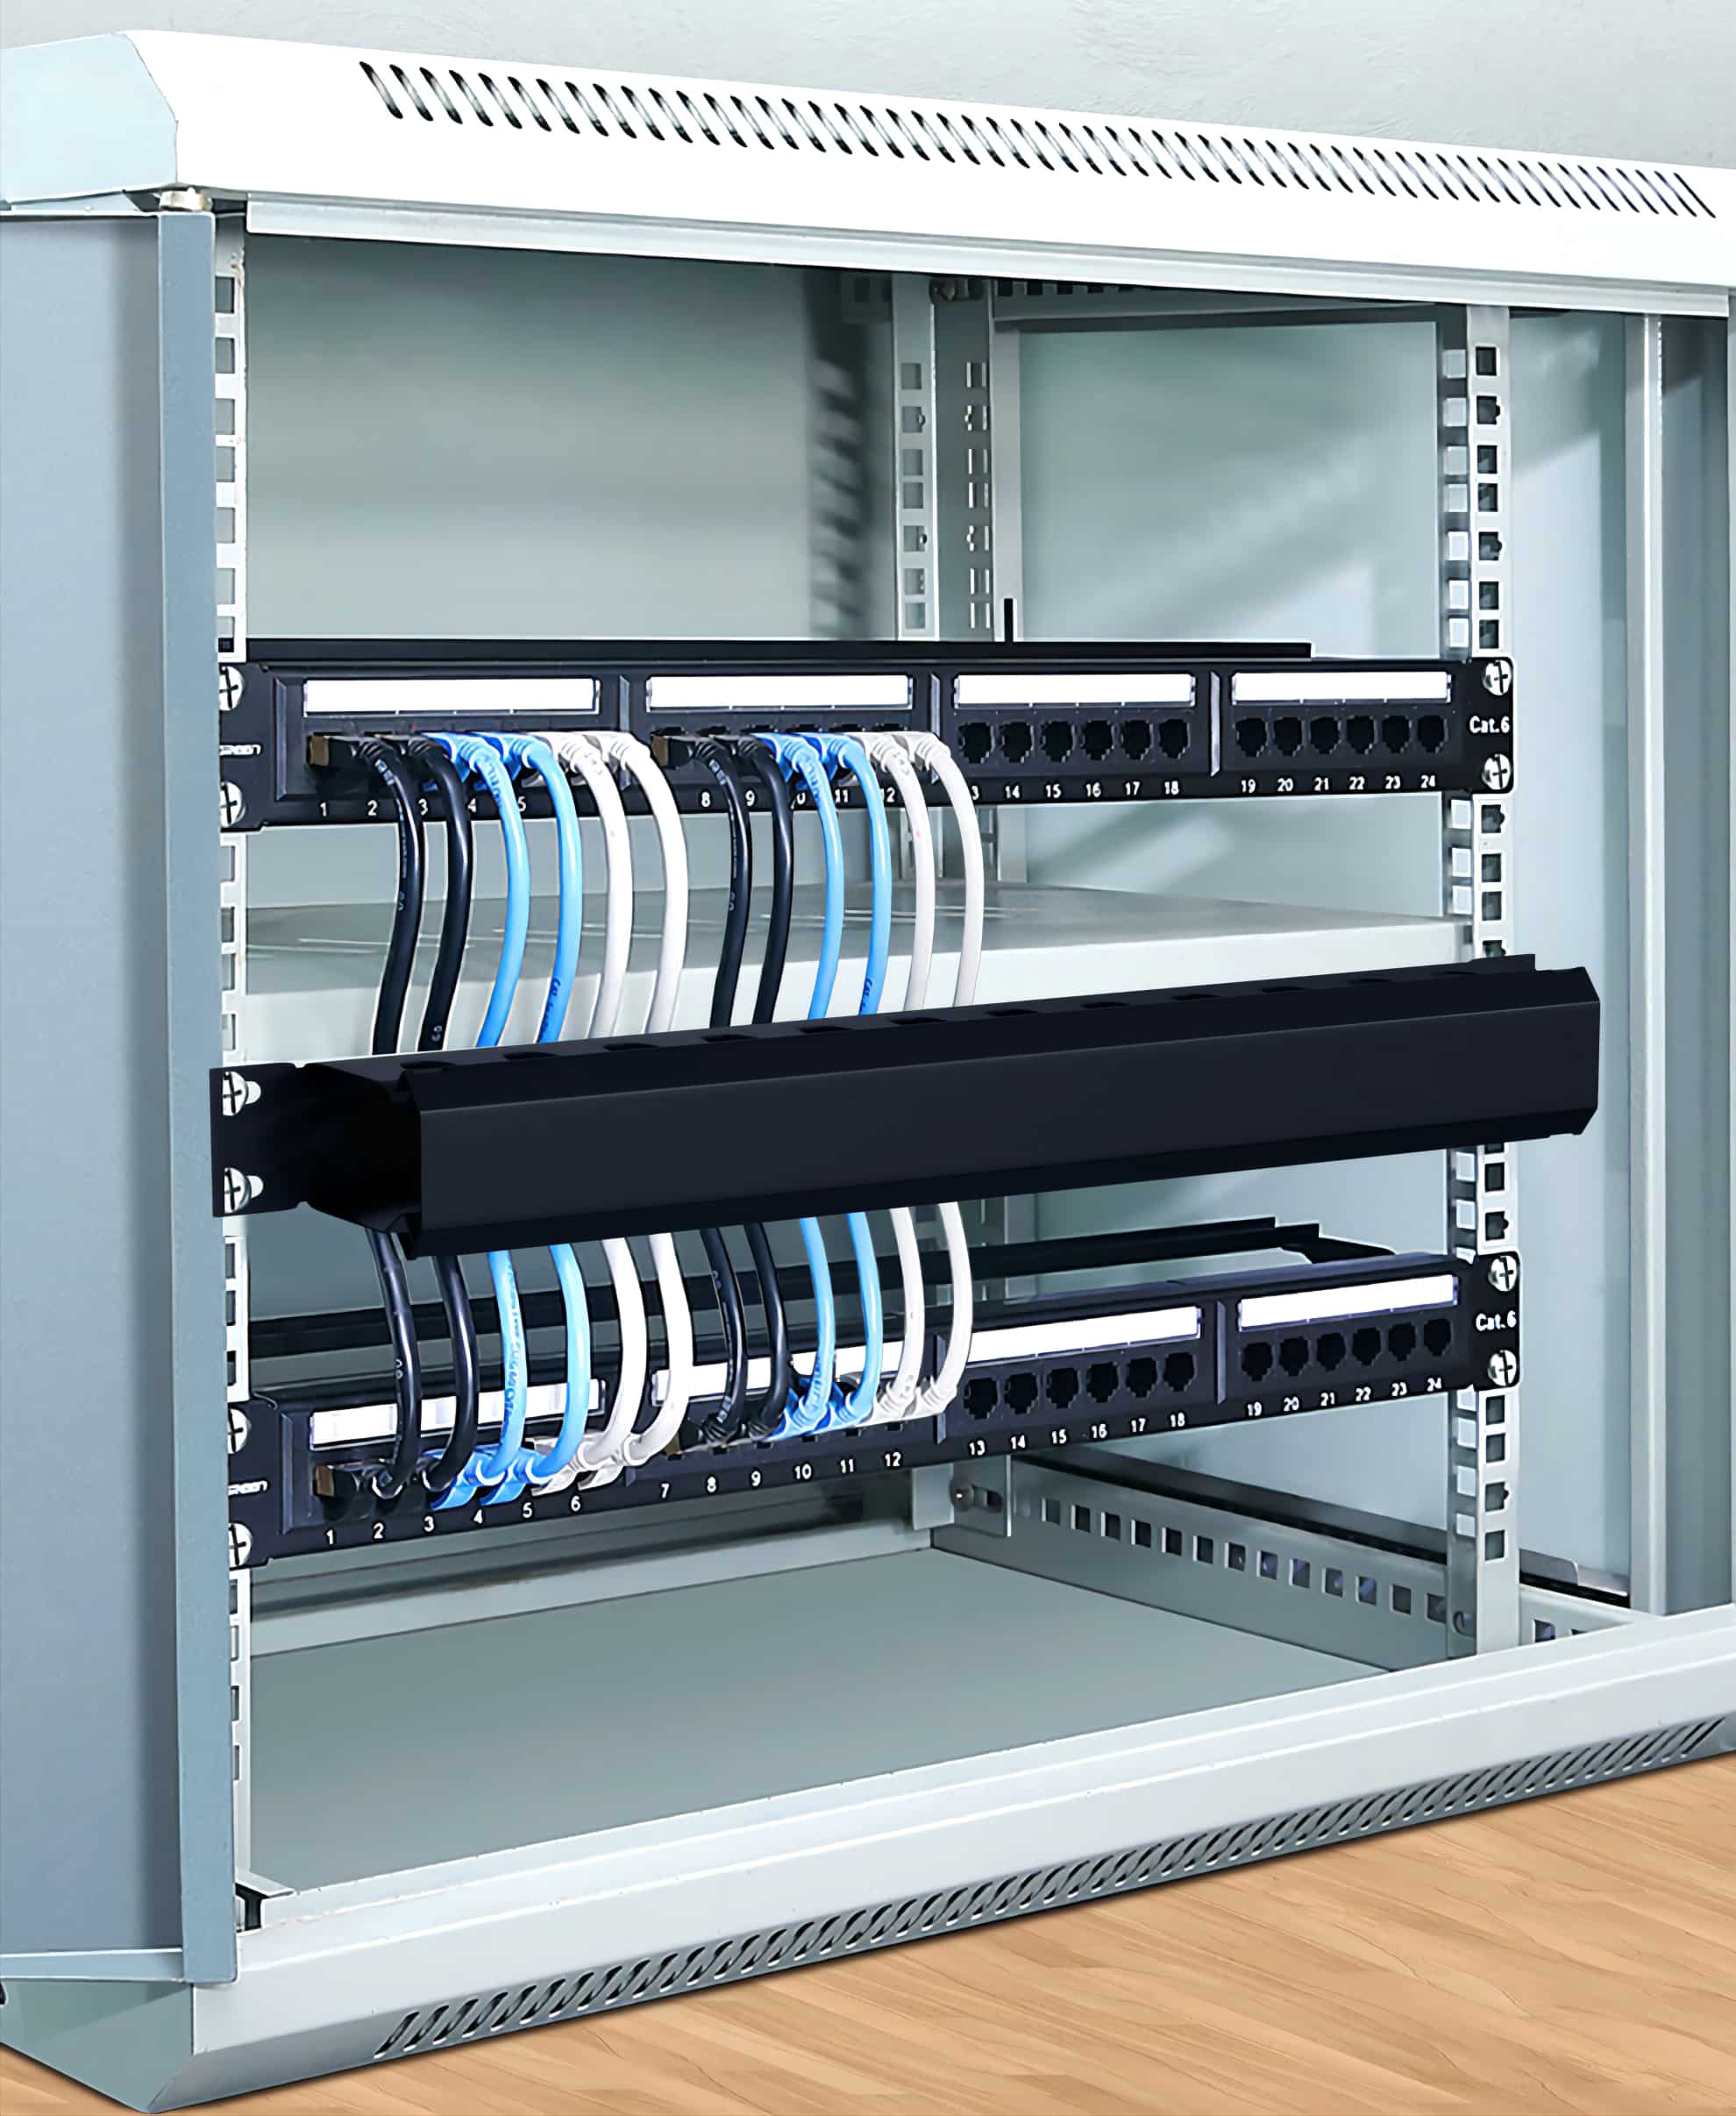 Fiber Optic Cable Manager|1U 19 Inch 24 Slots Single Side Cold Rolled Steel Cable Organizer